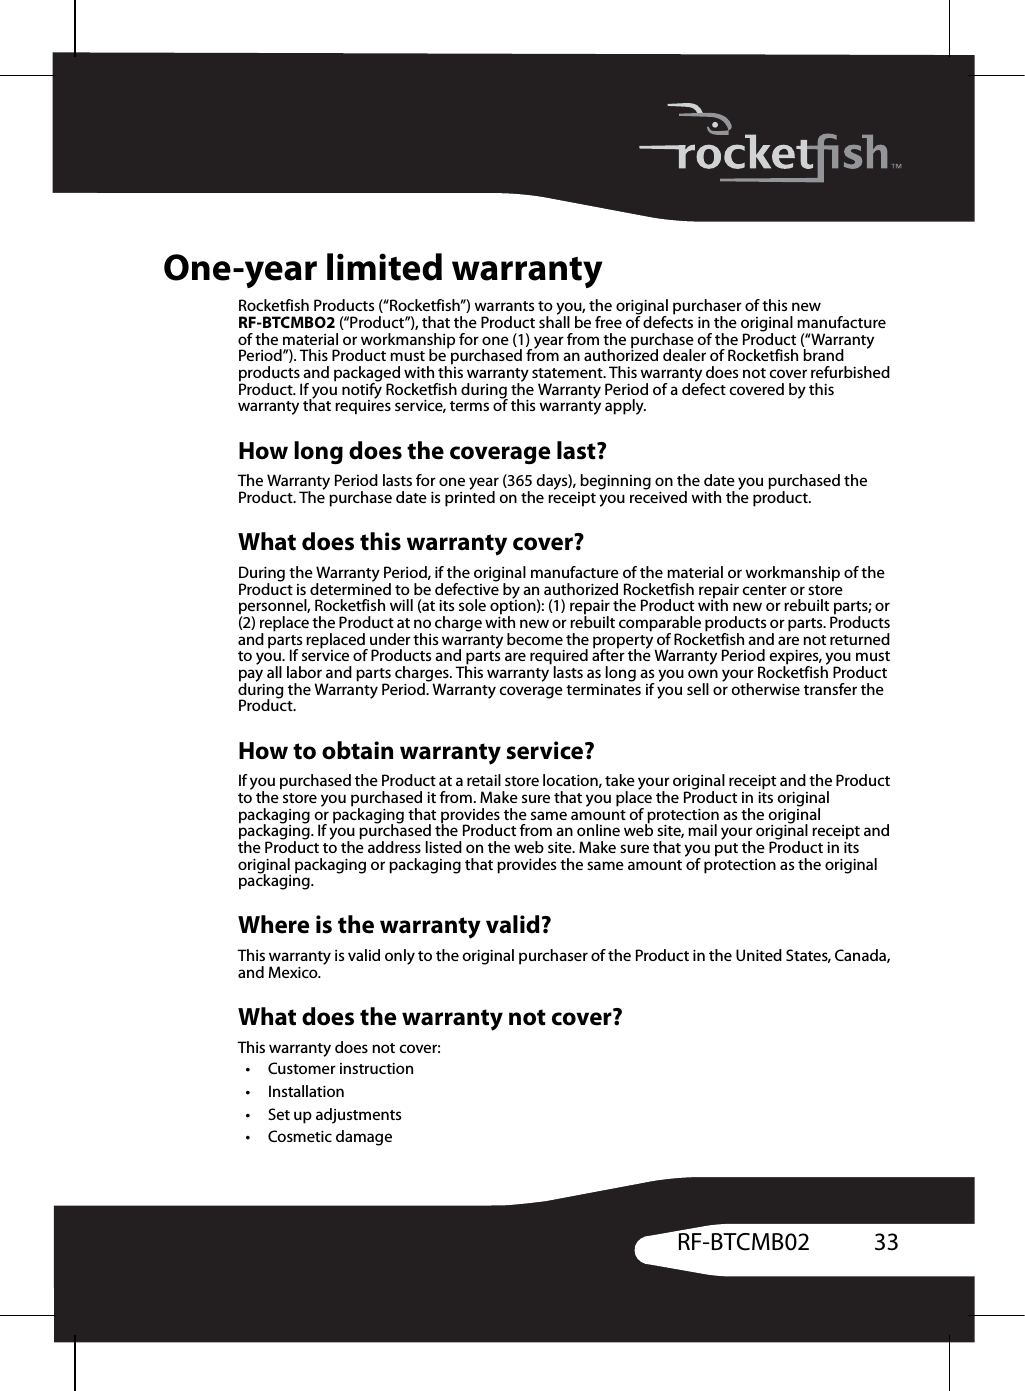 33RF-BTCMB02One-year limited warrantyRocketfish Products (“Rocketfish”) warrants to you, the original purchaser of this new RF-BTCMBO2 (“Product”), that the Product shall be free of defects in the original manufacture of the material or workmanship for one (1) year from the purchase of the Product (“Warranty Period”). This Product must be purchased from an authorized dealer of Rocketfish brand products and packaged with this warranty statement. This warranty does not cover refurbished Product. If you notify Rocketfish during the Warranty Period of a defect covered by this warranty that requires service, terms of this warranty apply.How long does the coverage last?The Warranty Period lasts for one year (365 days), beginning on the date you purchased the Product. The purchase date is printed on the receipt you received with the product.What does this warranty cover?During the Warranty Period, if the original manufacture of the material or workmanship of the Product is determined to be defective by an authorized Rocketfish repair center or store personnel, Rocketfish will (at its sole option): (1) repair the Product with new or rebuilt parts; or (2) replace the Product at no charge with new or rebuilt comparable products or parts. Products and parts replaced under this warranty become the property of Rocketfish and are not returned to you. If service of Products and parts are required after the Warranty Period expires, you must pay all labor and parts charges. This warranty lasts as long as you own your Rocketfish Product during the Warranty Period. Warranty coverage terminates if you sell or otherwise transfer the Product.How to obtain warranty service?If you purchased the Product at a retail store location, take your original receipt and the Product to the store you purchased it from. Make sure that you place the Product in its original packaging or packaging that provides the same amount of protection as the original packaging. If you purchased the Product from an online web site, mail your original receipt and the Product to the address listed on the web site. Make sure that you put the Product in its original packaging or packaging that provides the same amount of protection as the original packaging.Where is the warranty valid?This warranty is valid only to the original purchaser of the Product in the United States, Canada, and Mexico.What does the warranty not cover?This warranty does not cover:•Customer instruction•Installation•Set up adjustments•Cosmetic damage